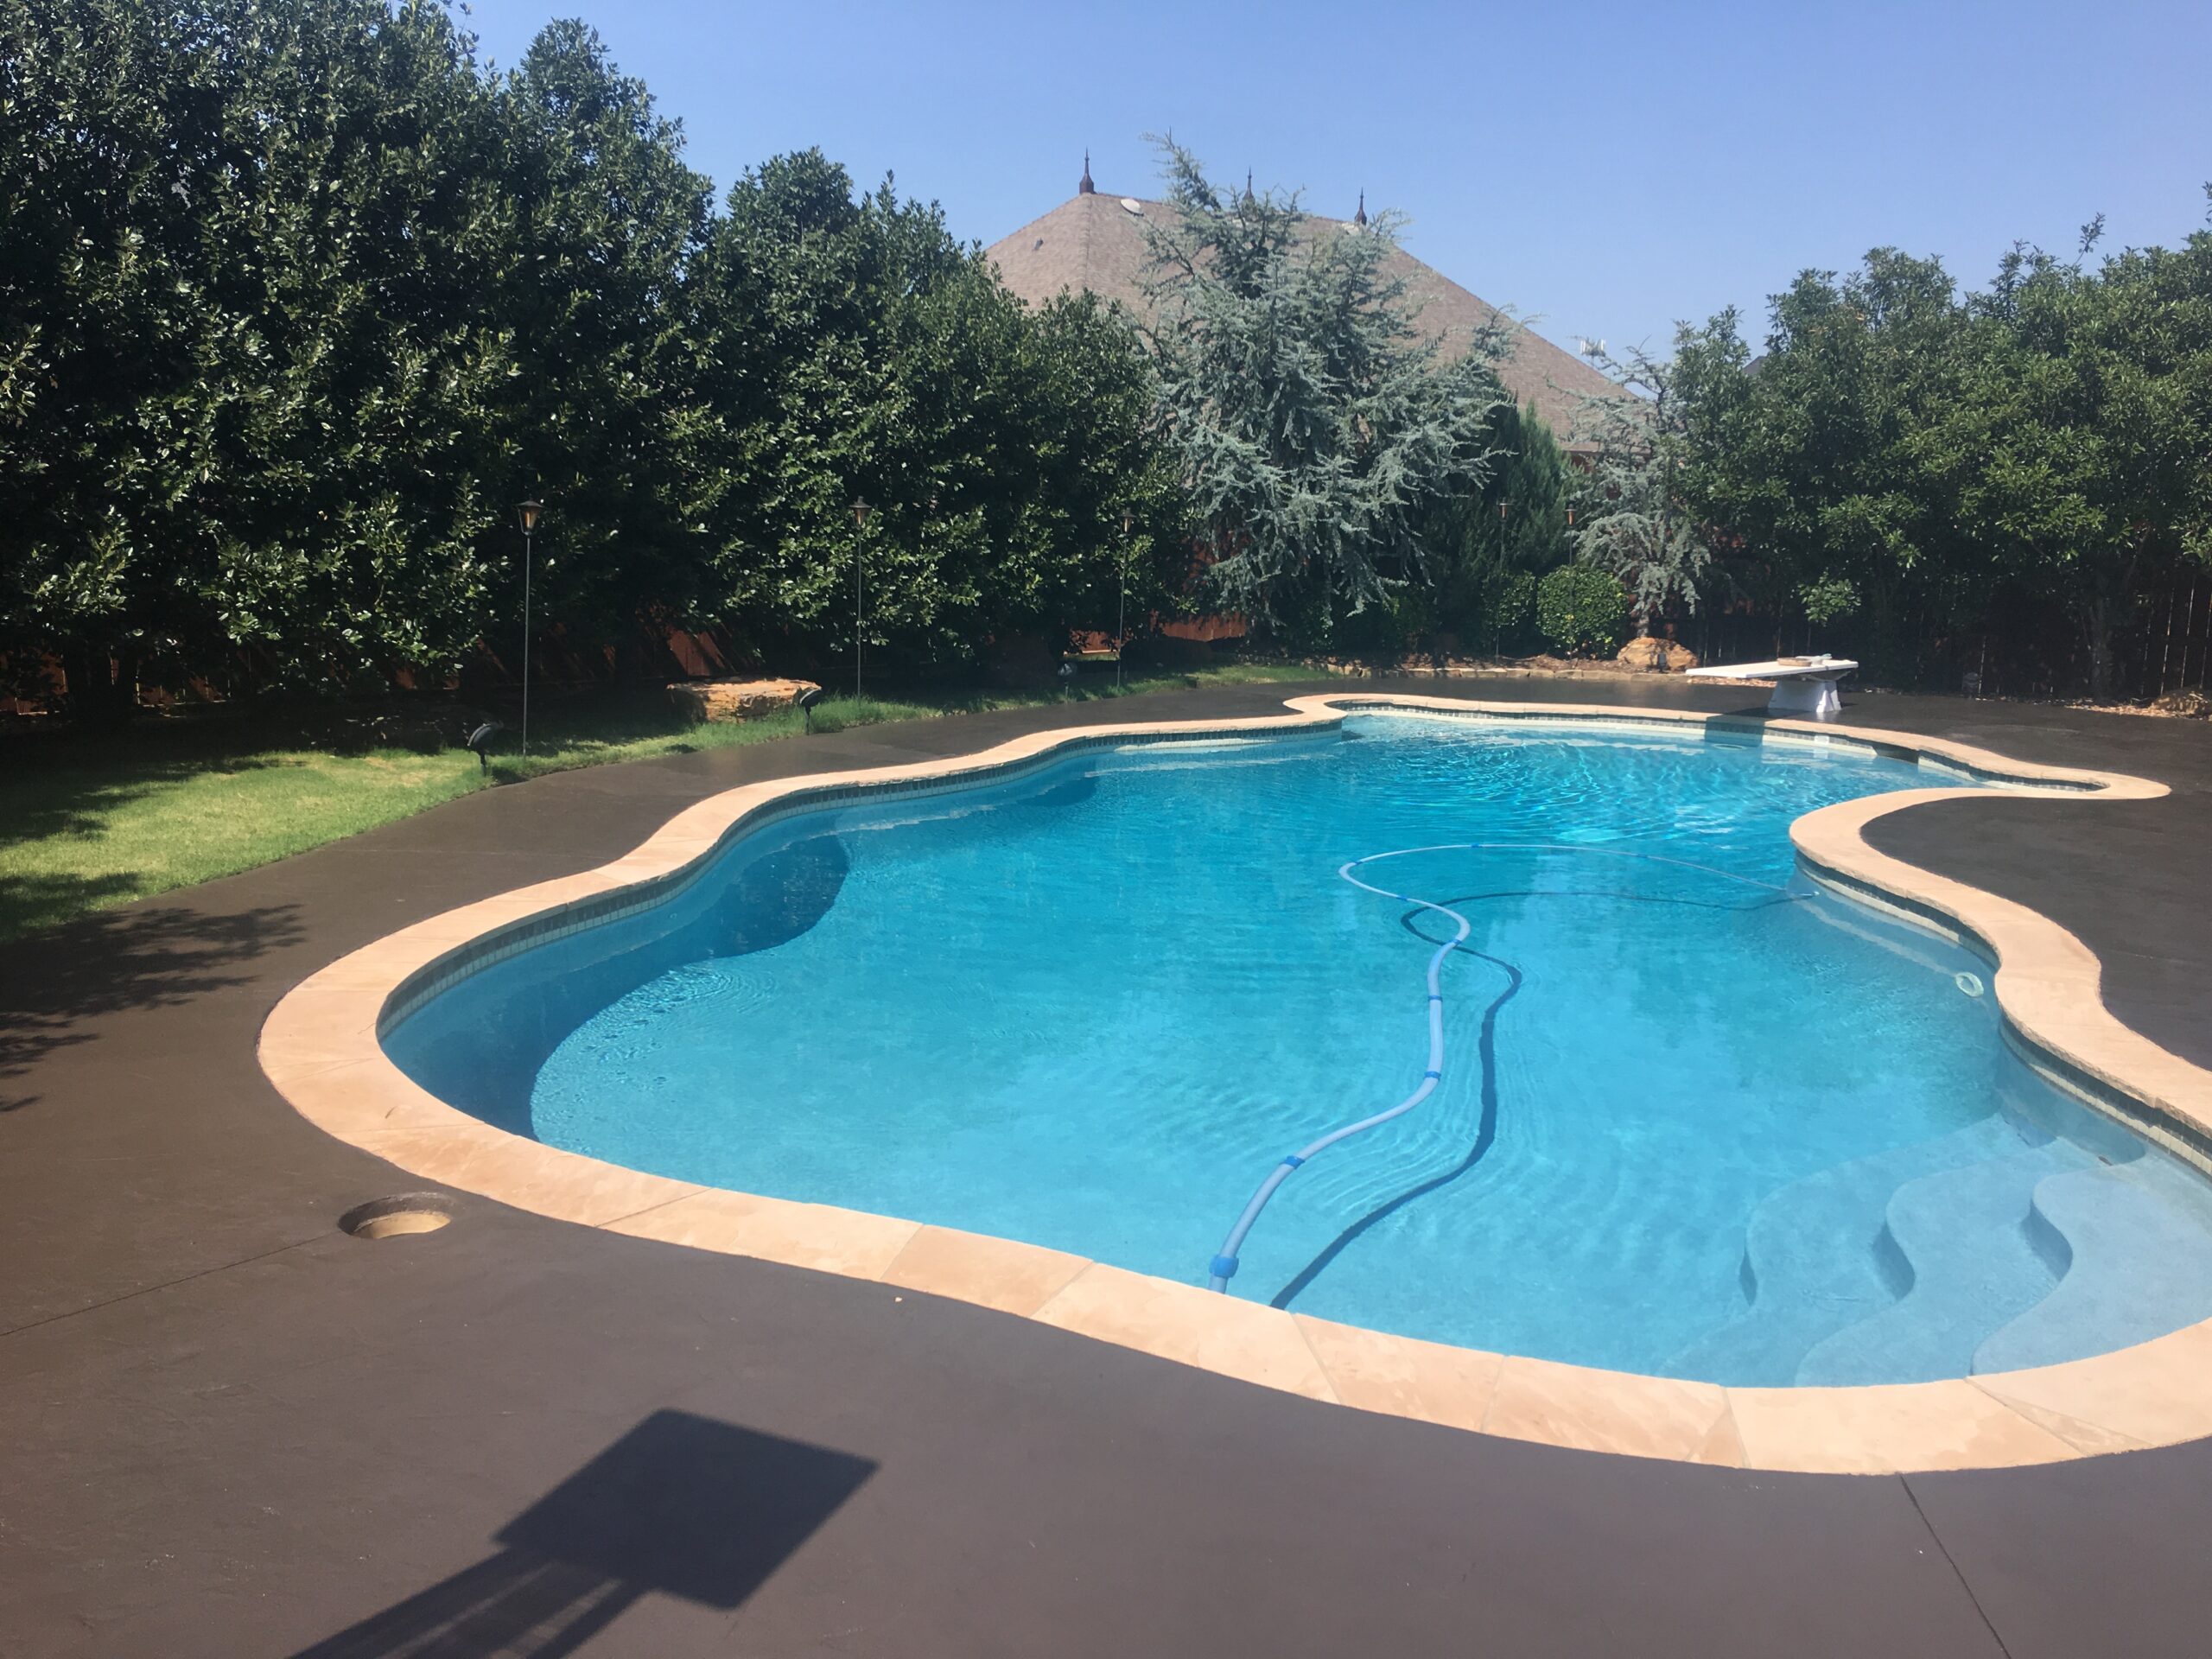 Chocolate EasyTint Stain on Concrete Pool Deck